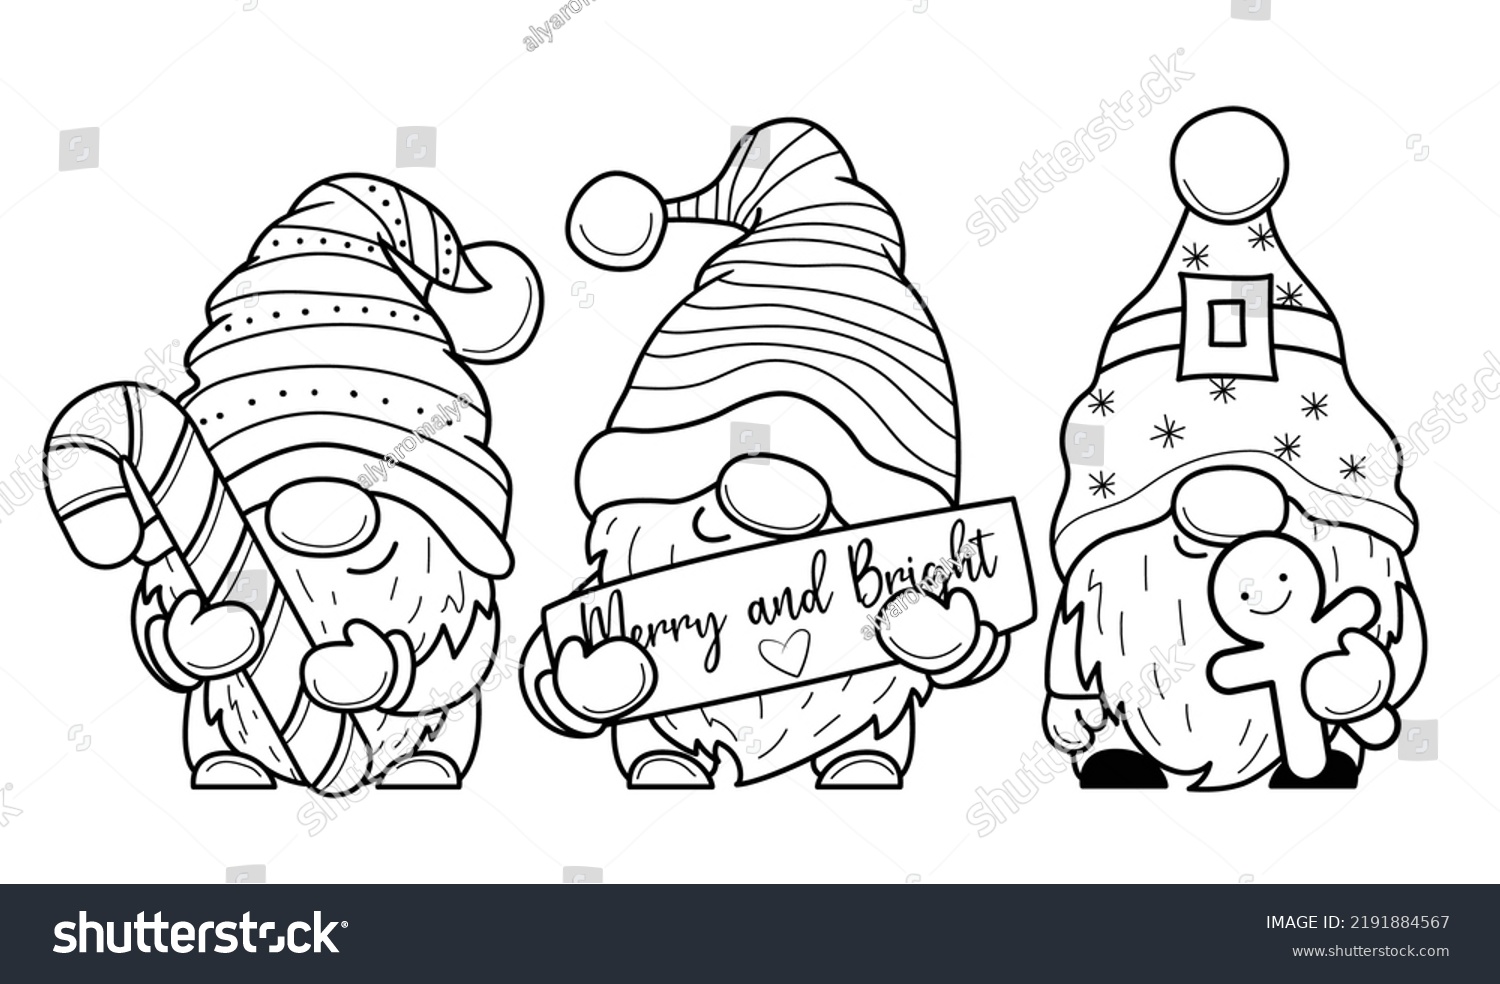 Outline christmas gnome images stock photos d objects vectors